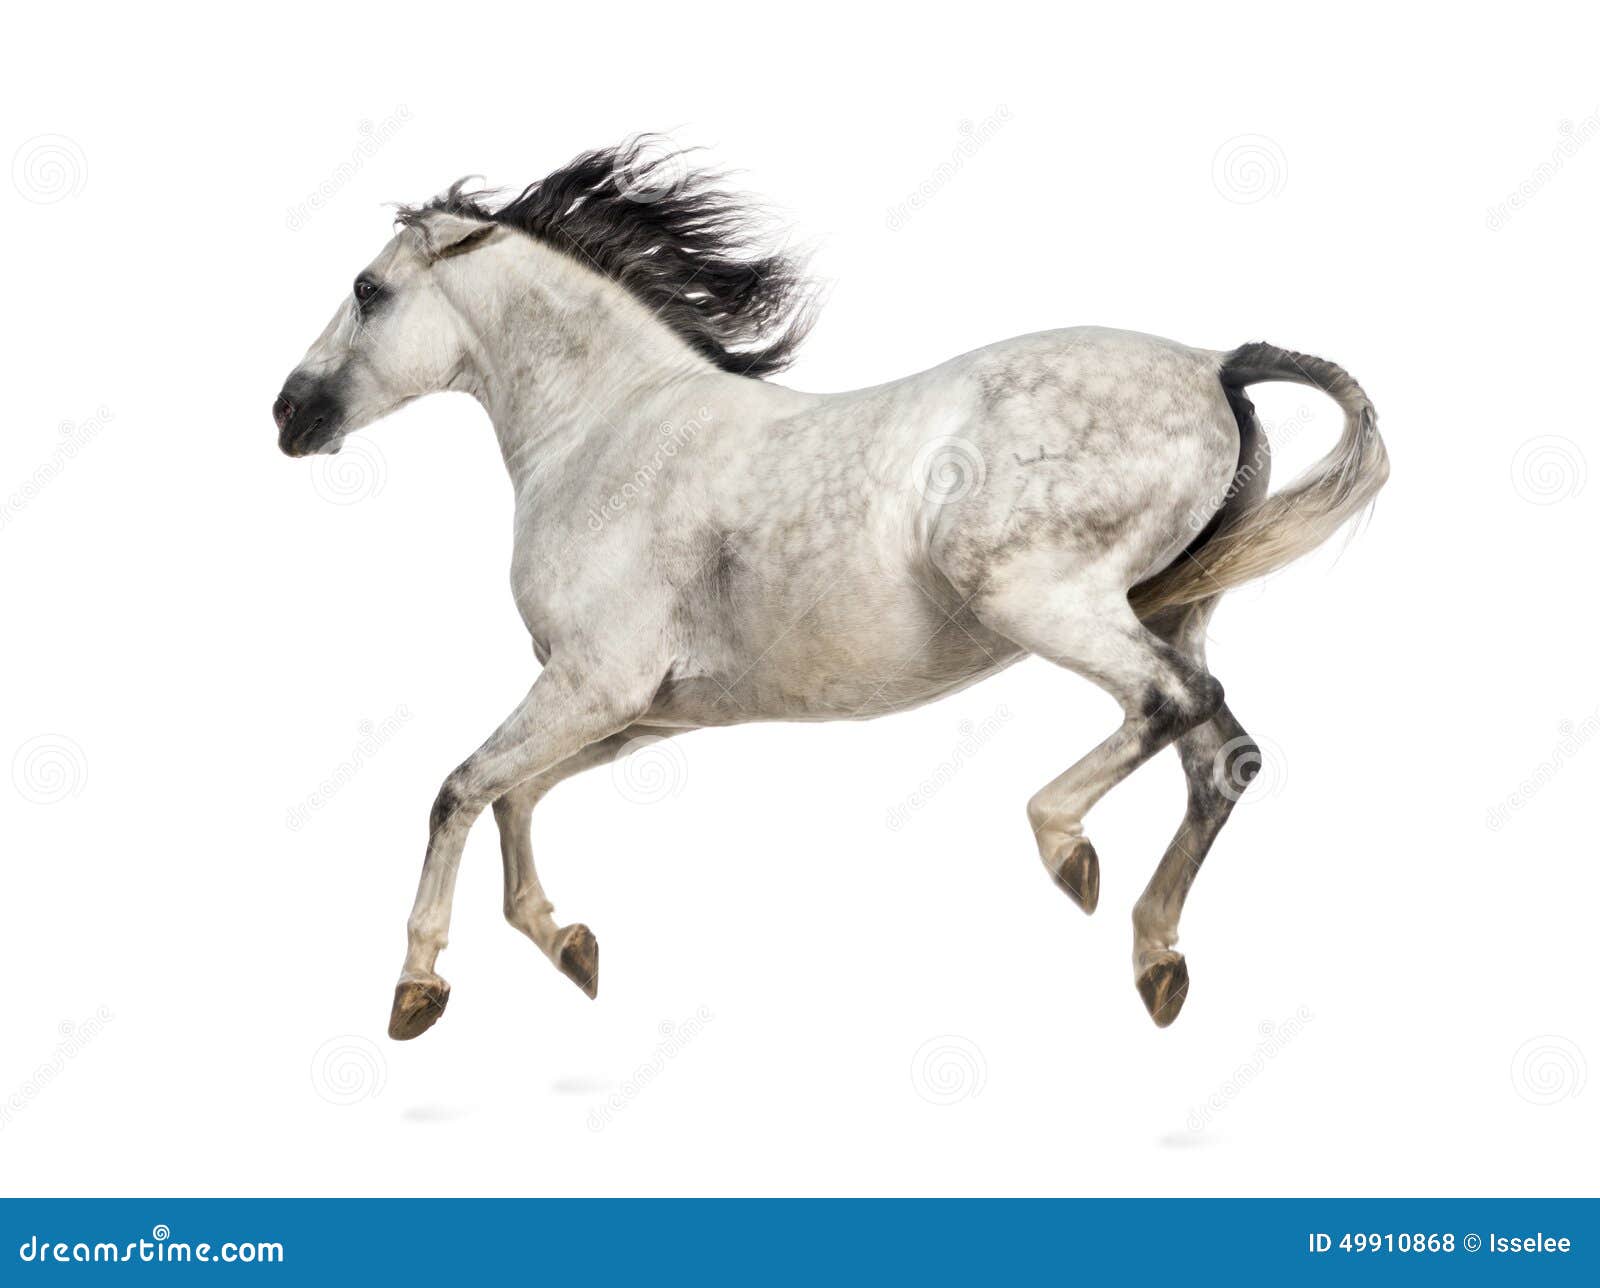 andalusian horse kicking out